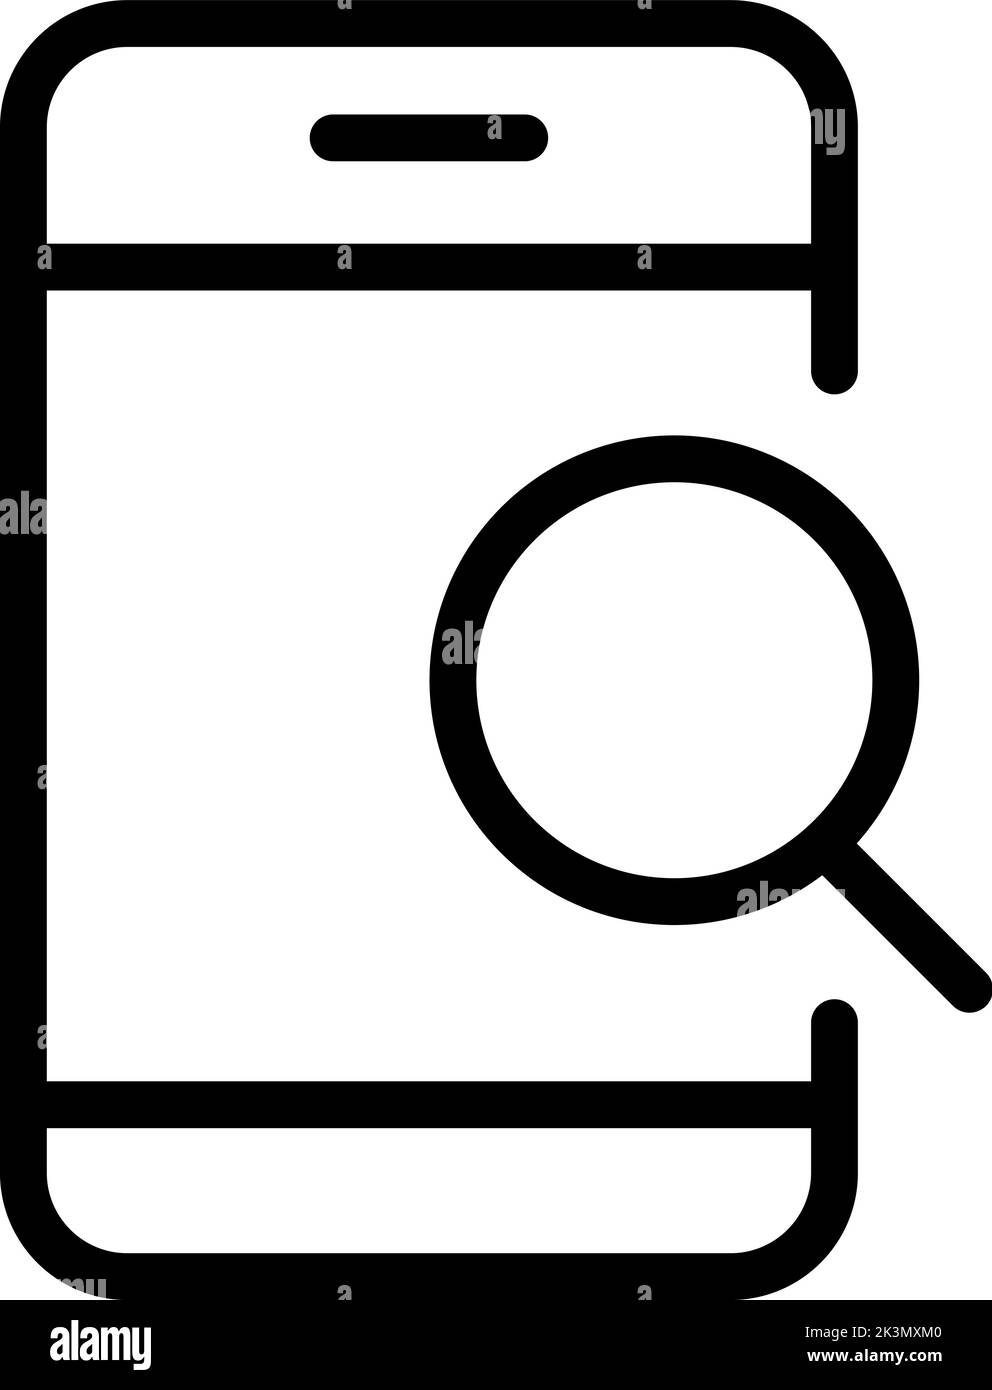 Phone Vector Search concept black icon illustration. Linear icon of smartphone with magnifier Stock Vector